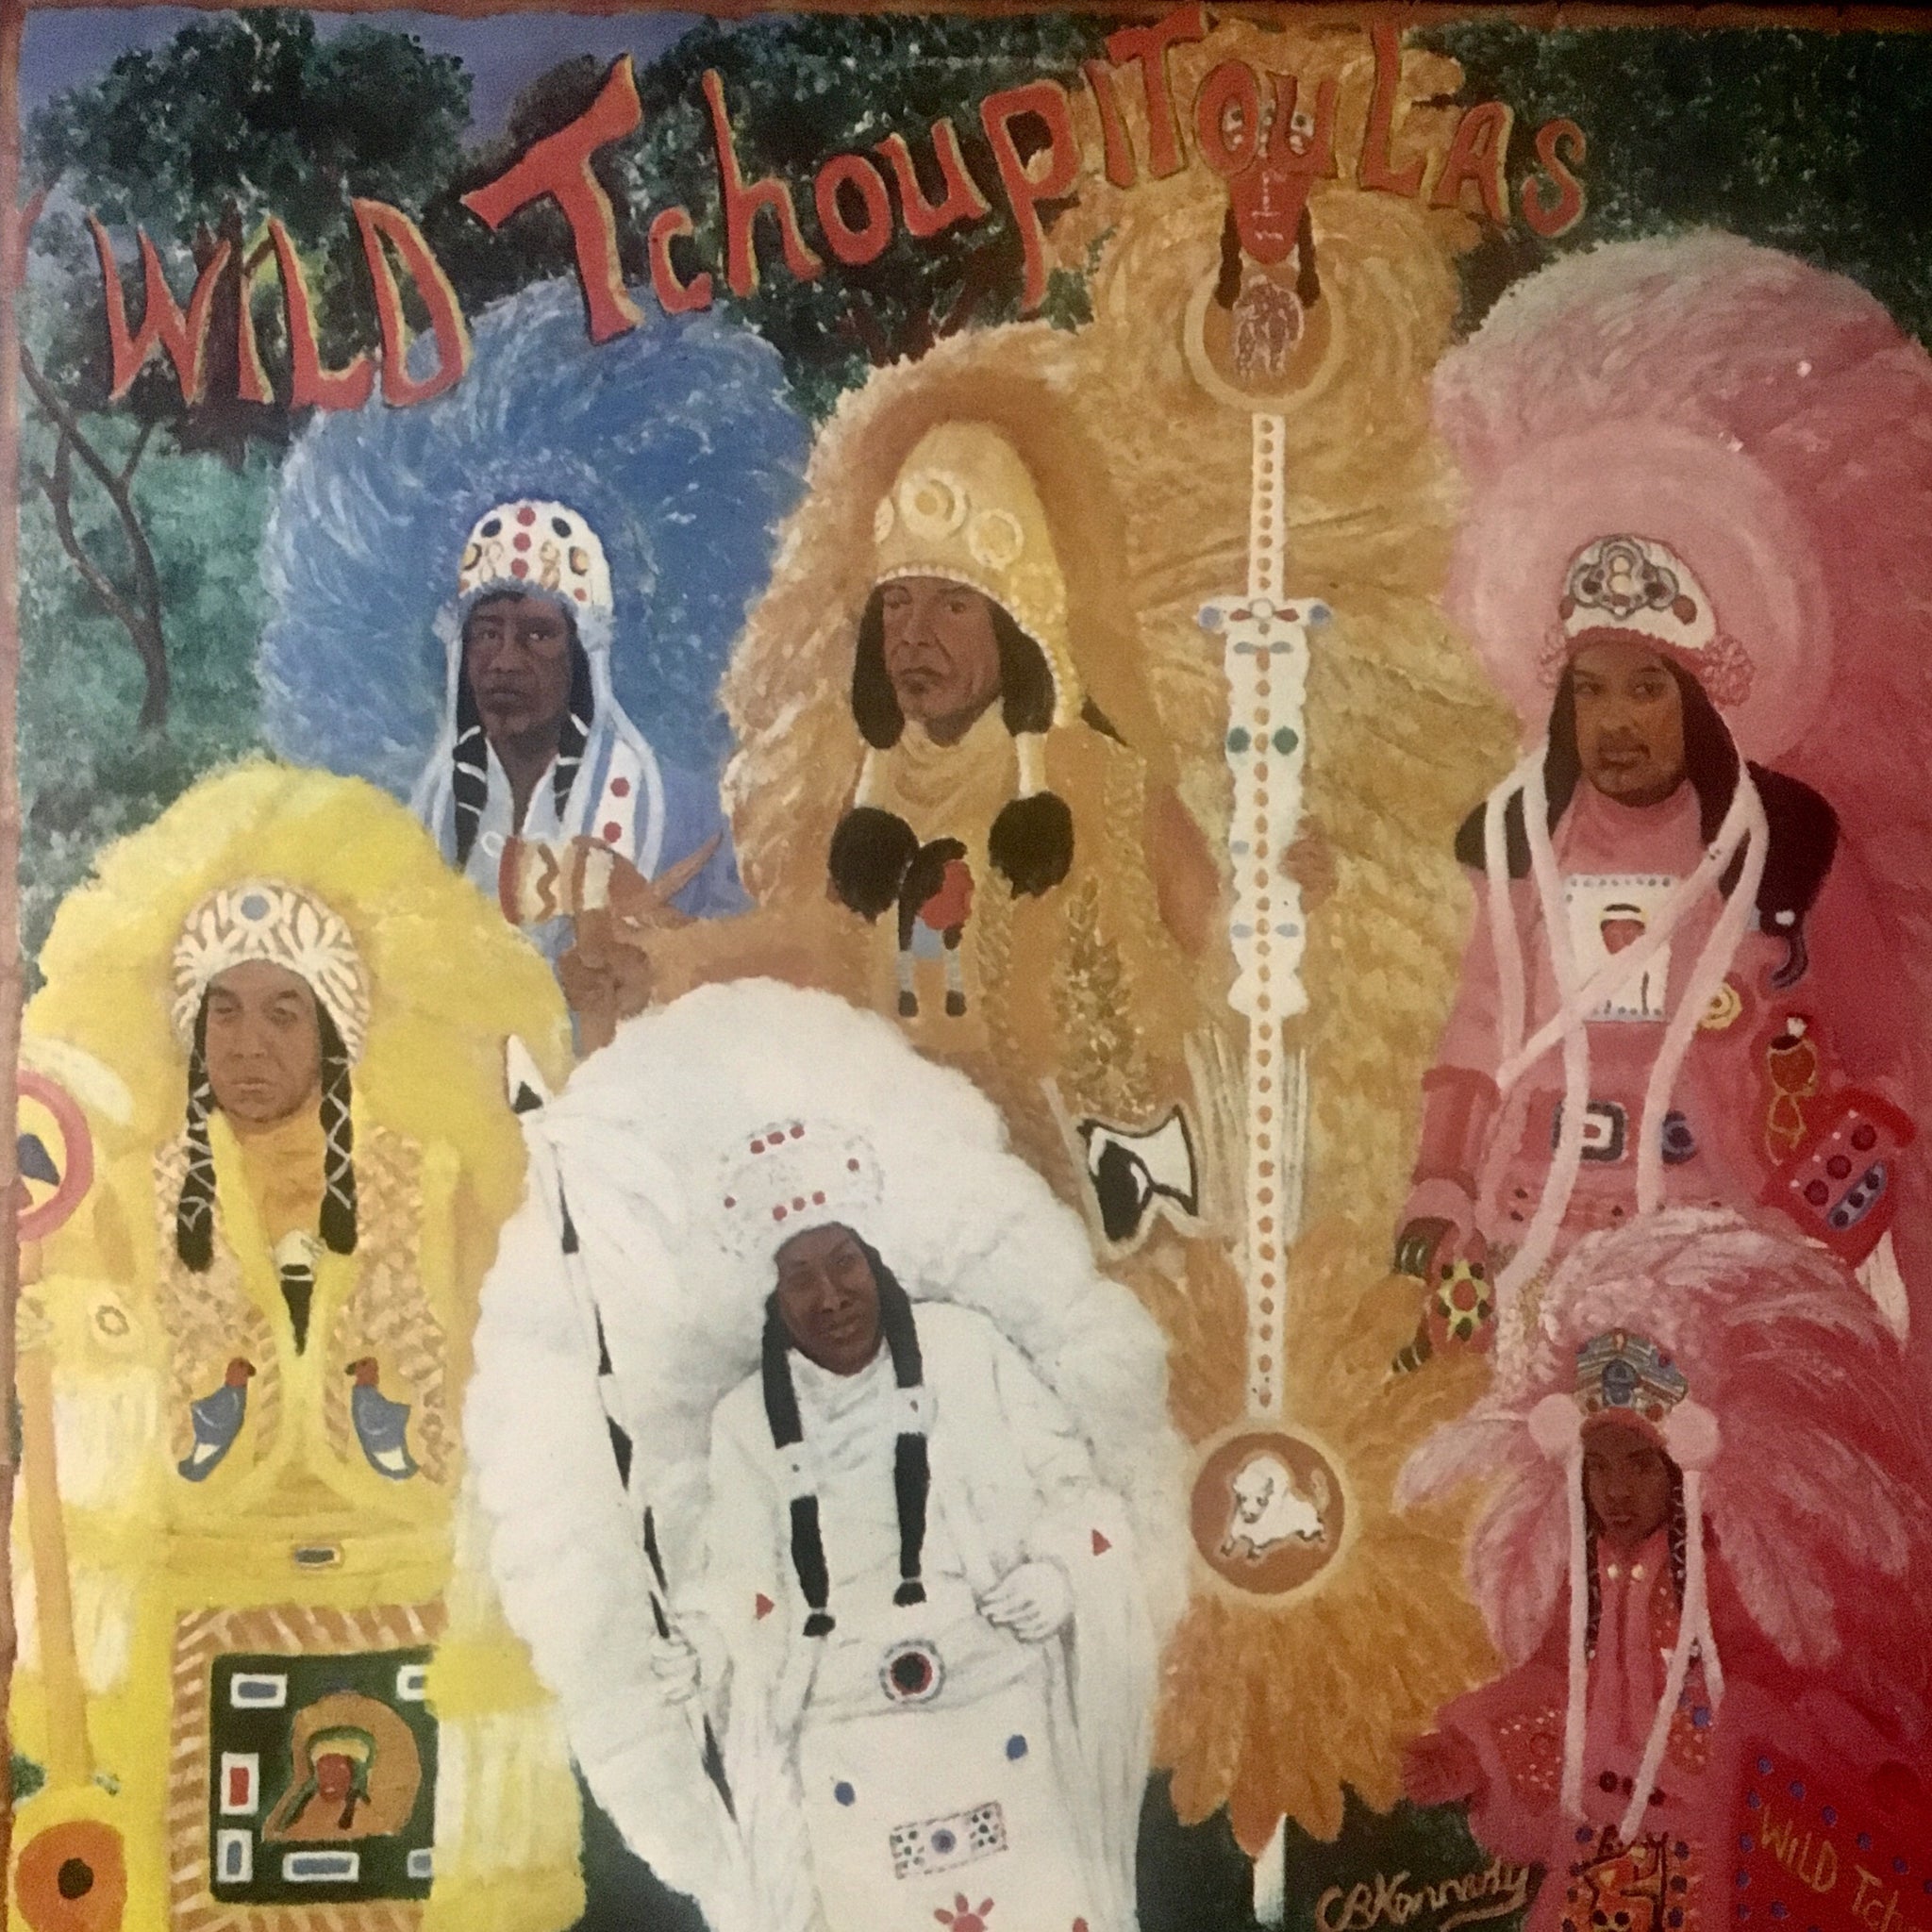 Wild Tchoupitoulas, The - S/T [New Orleans funky party 1976] - New LP